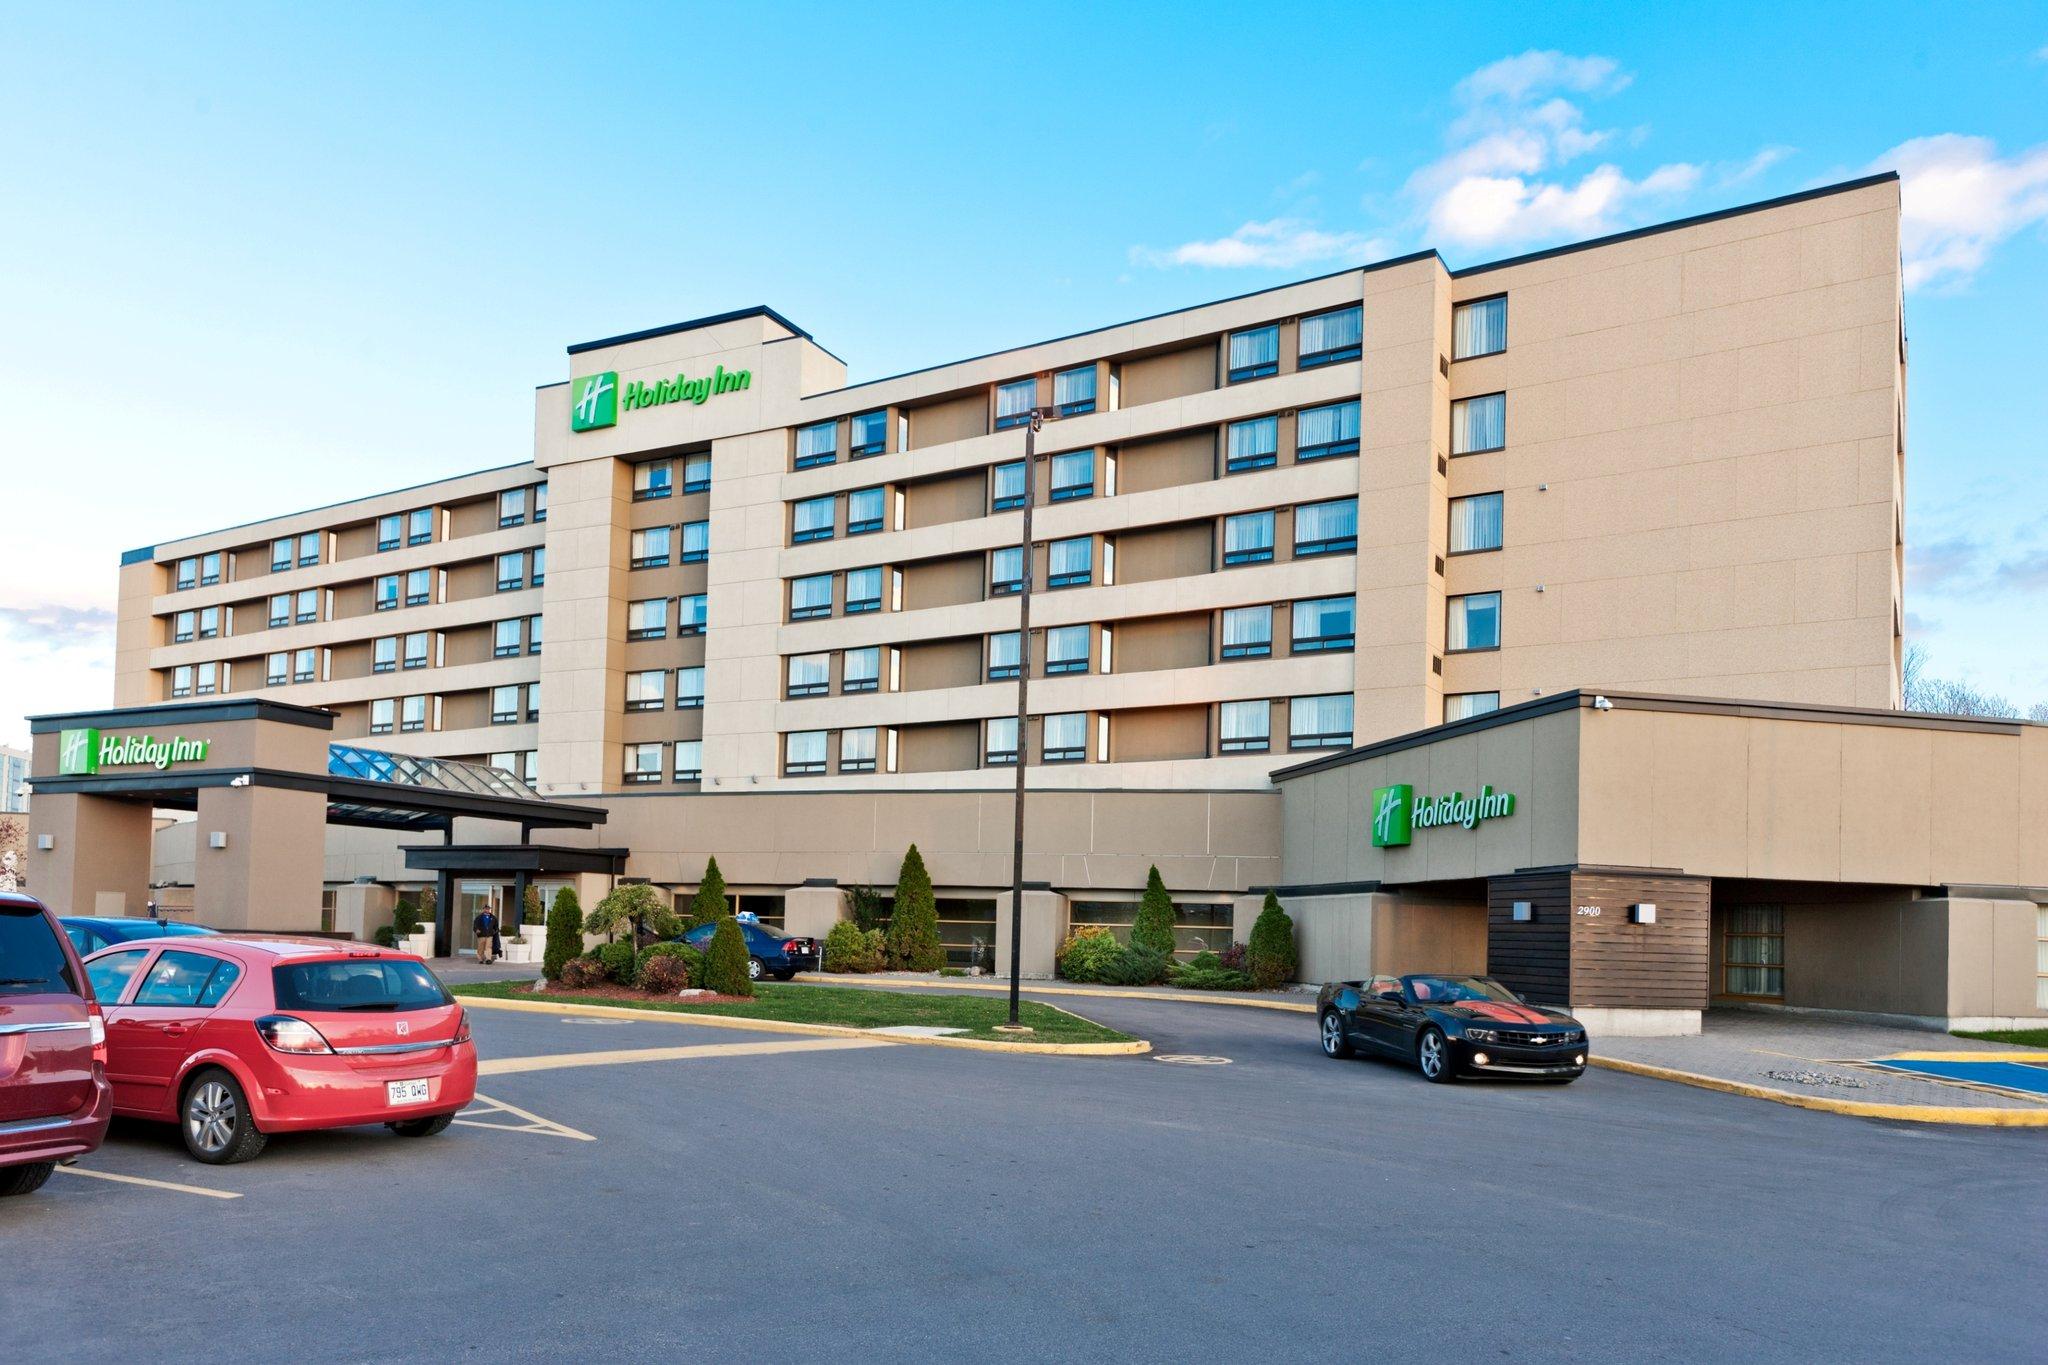 Holiday Inn Laval - Montreal in Laval, QC